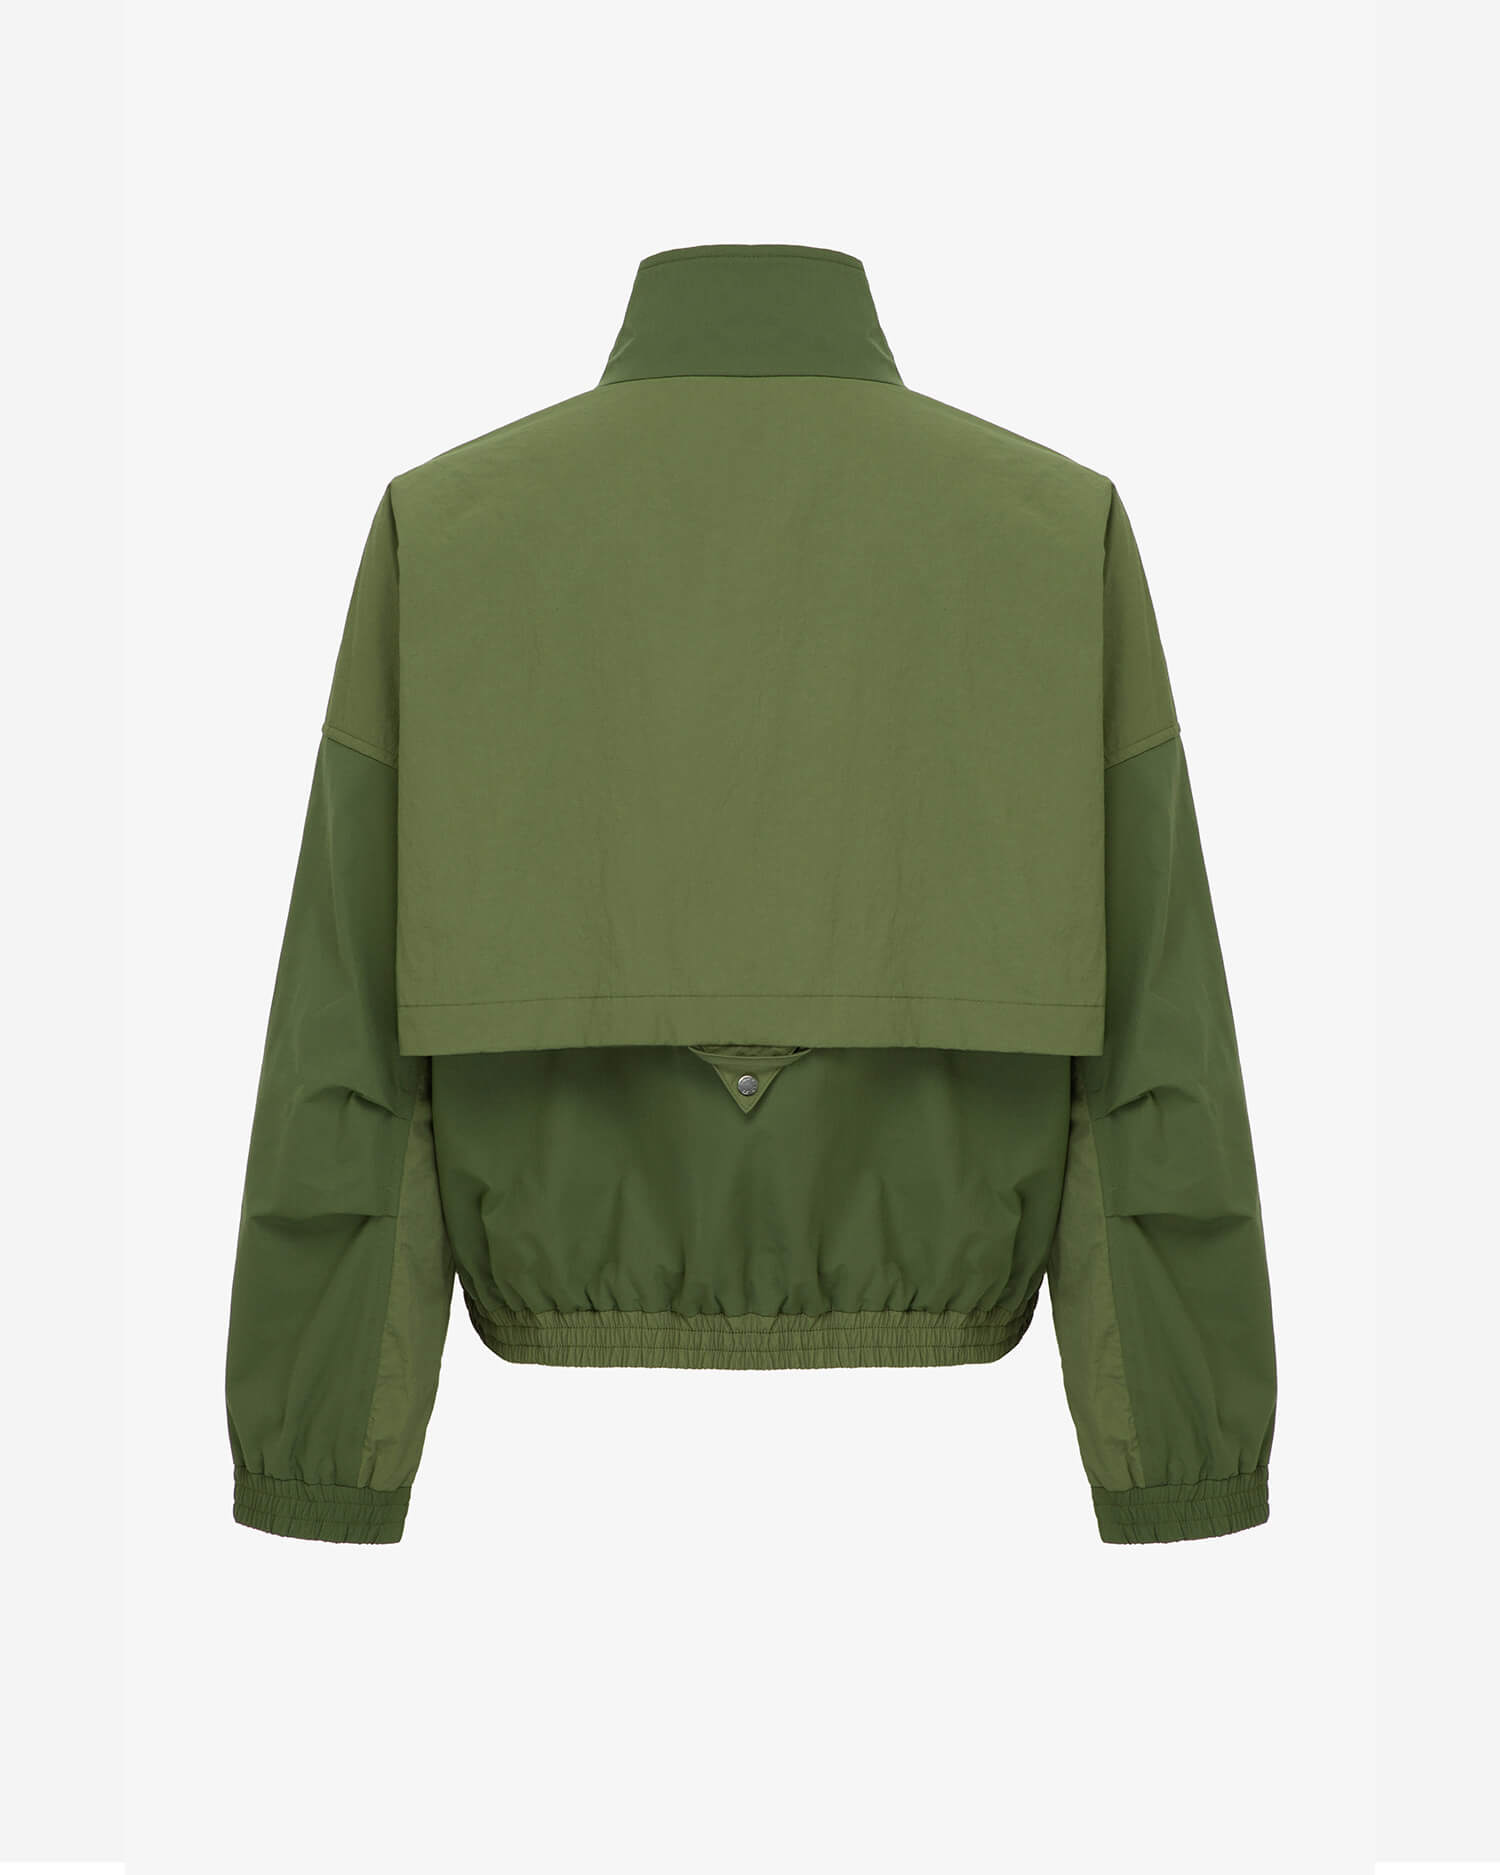 Women's Cropped Track Jacket in Military Green 02 #military-green